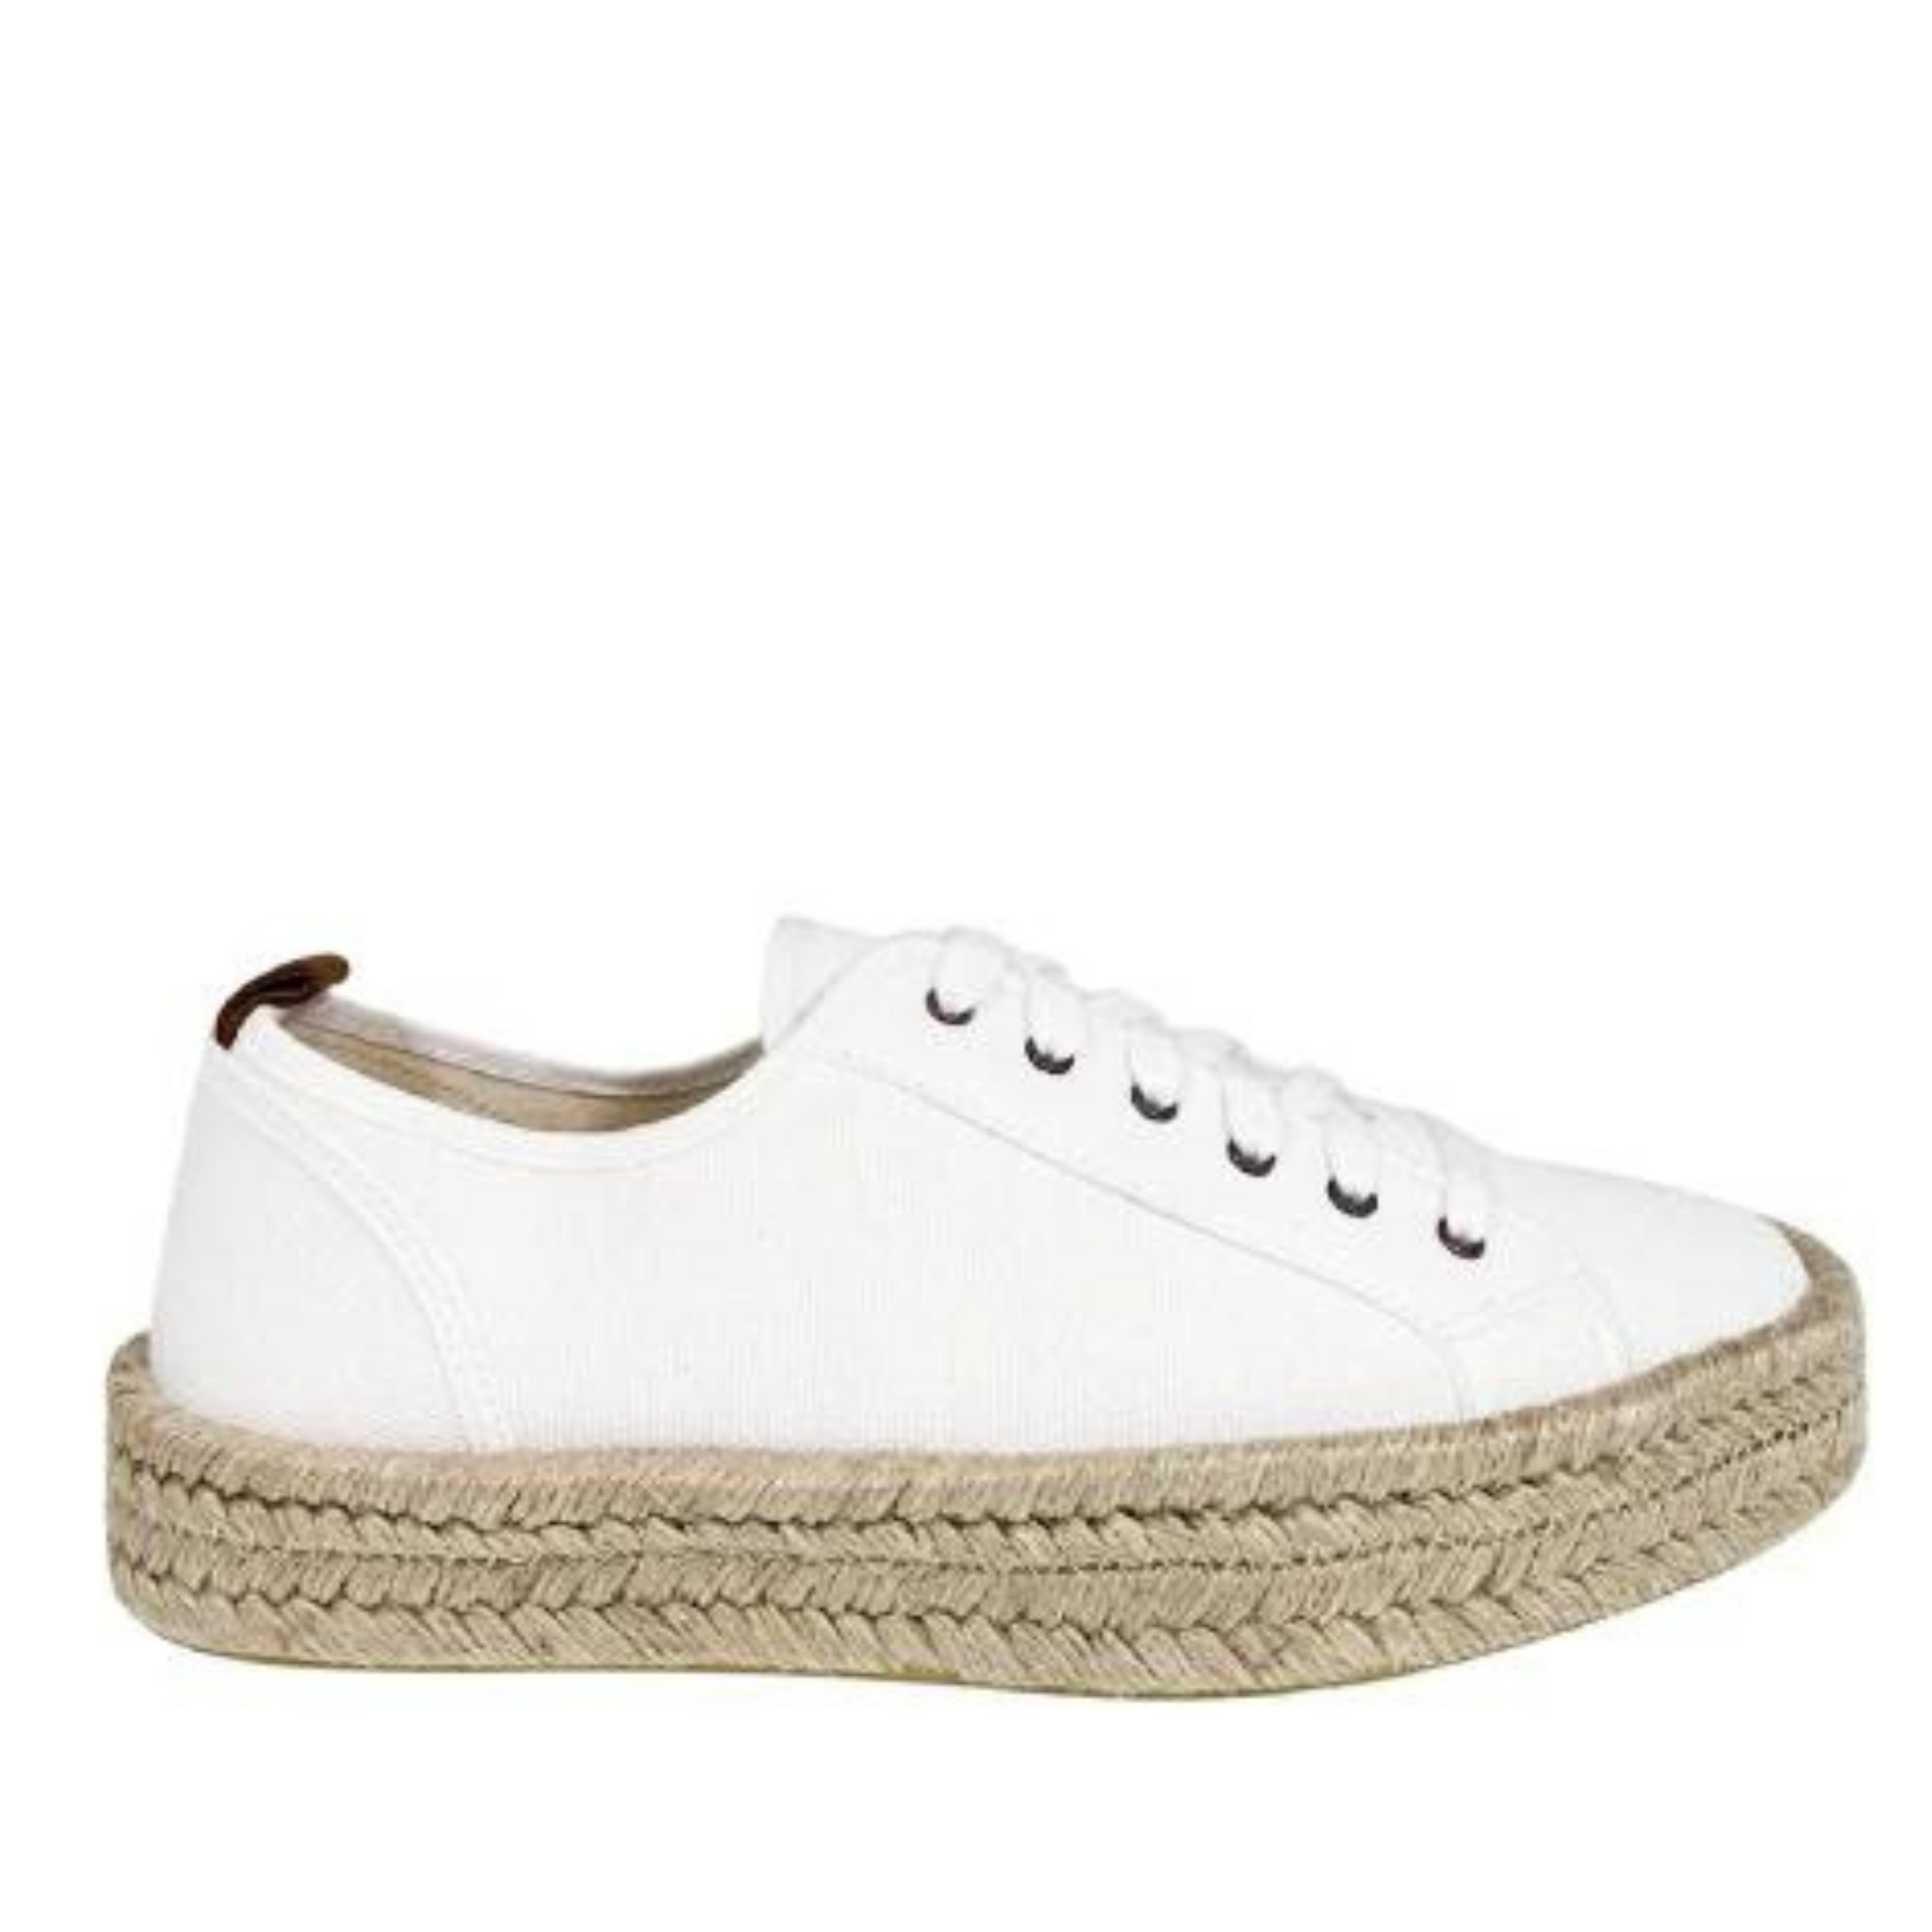 A side view of the Ateliers Mika shoe in the colour white, showing the laces, the white upper and the rope like platform design.